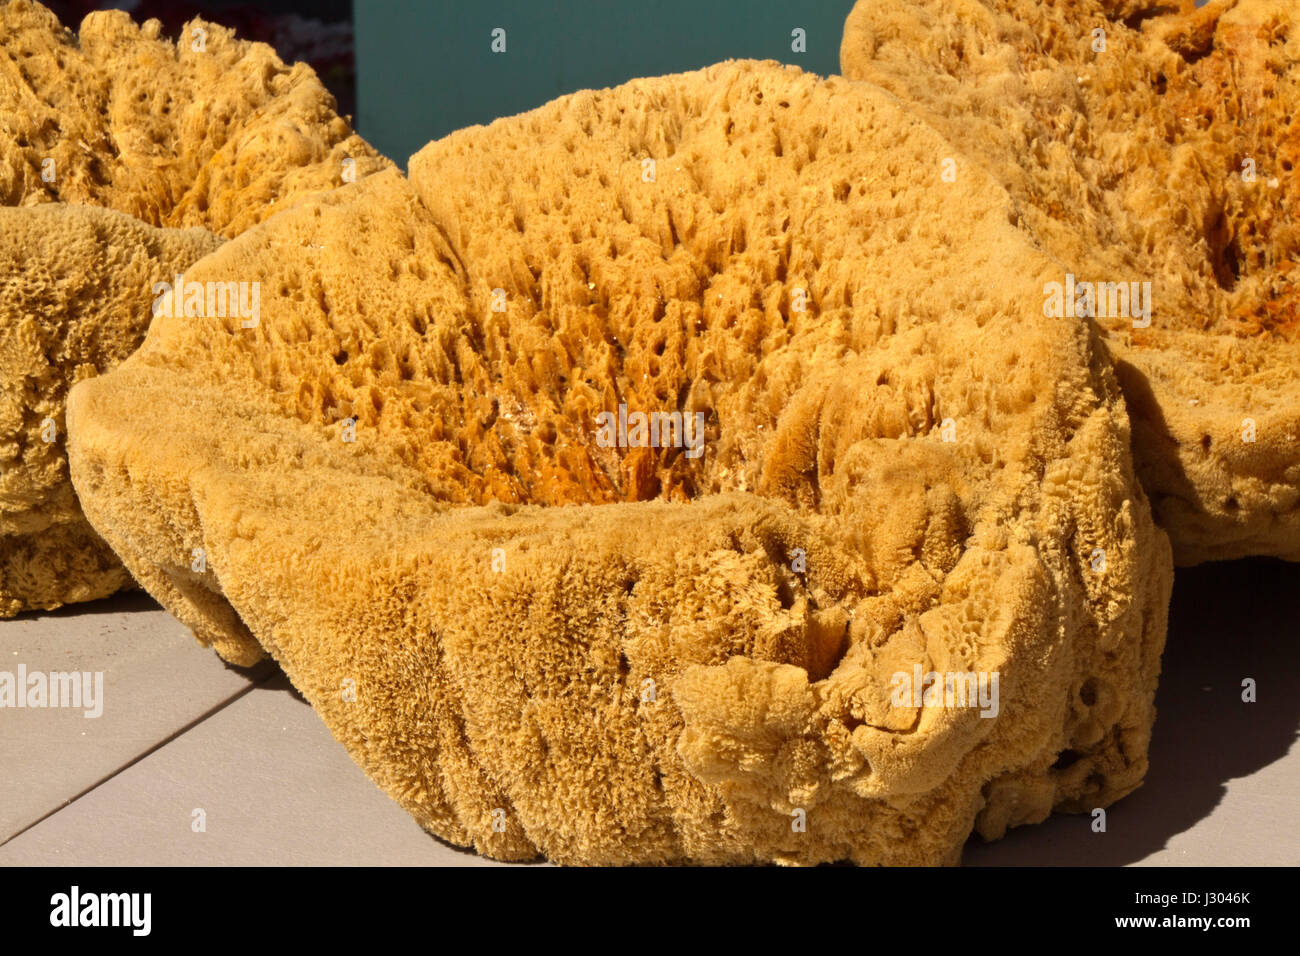 Close up of natural sea sponges, multicellular parazoan organisms with porous bodies filled with channels that enable water to circulate through them  Stock Photo